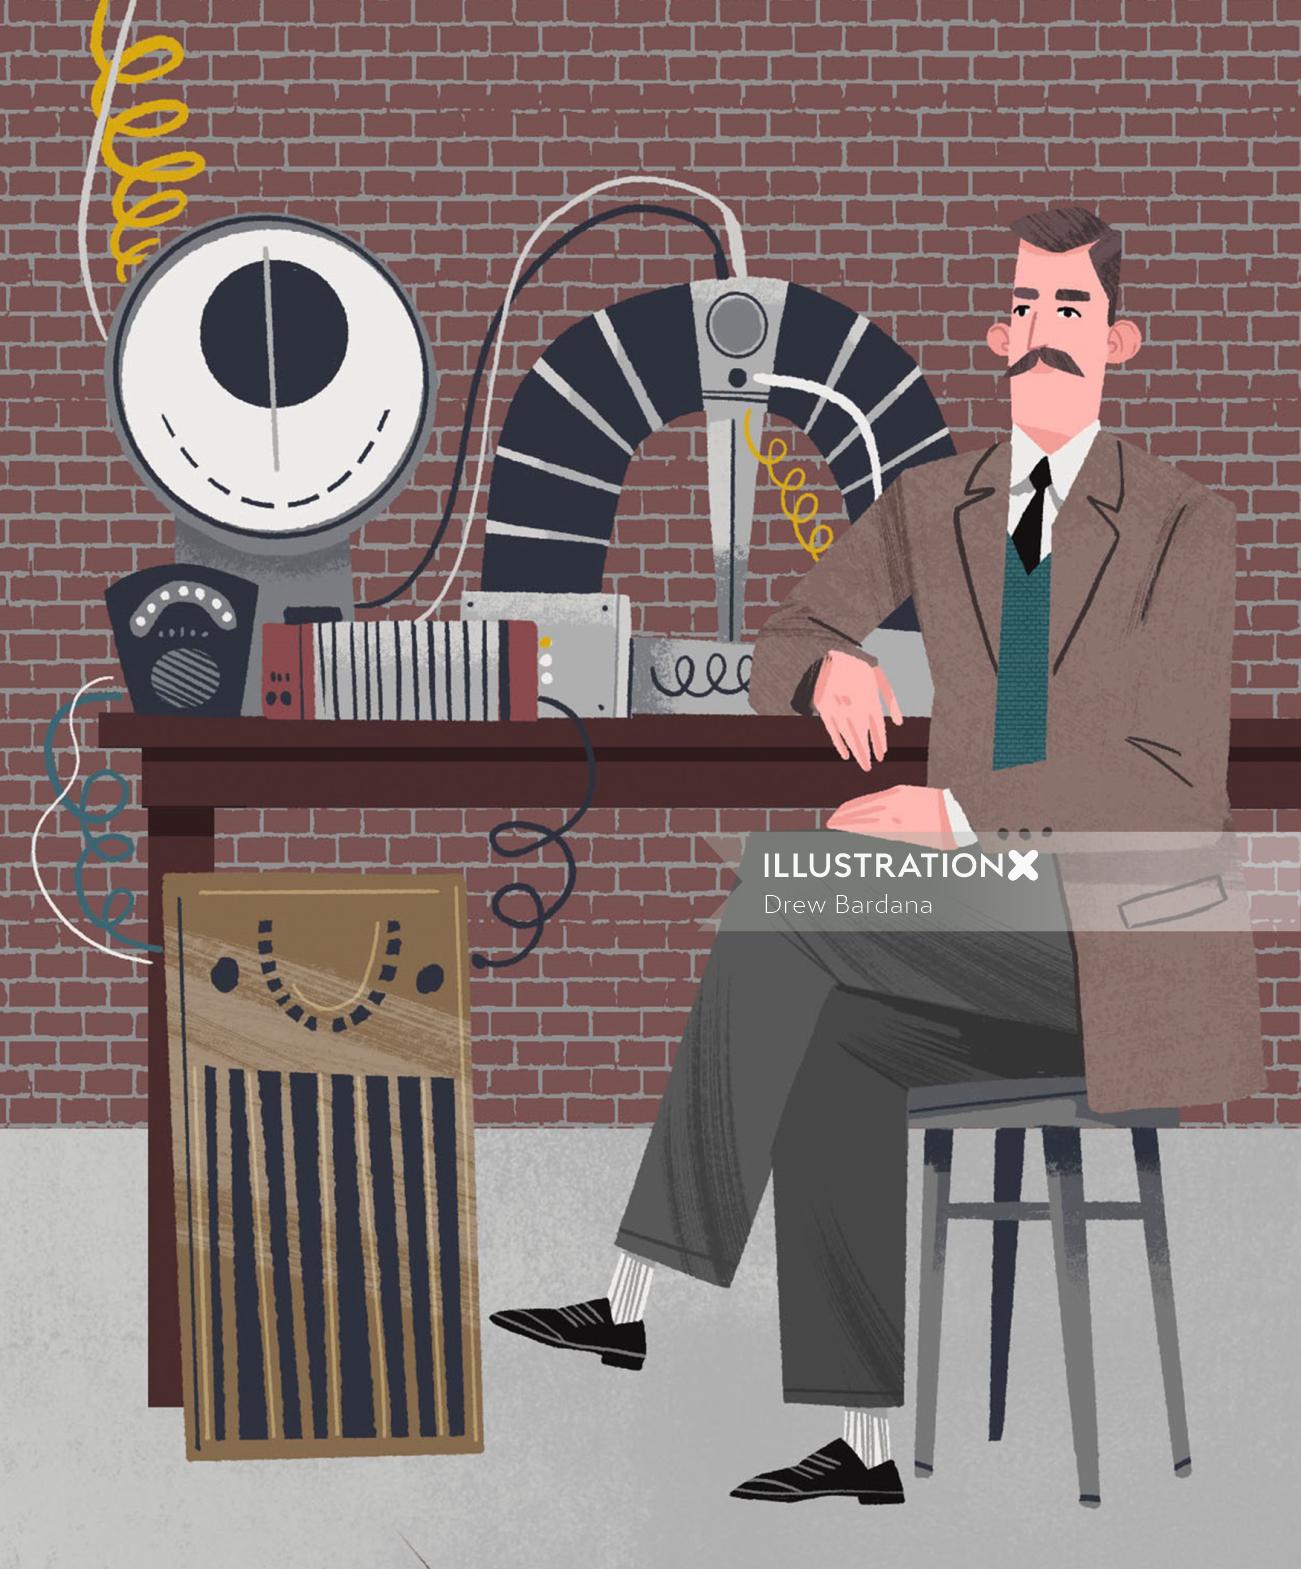 People Ernest Rutherford and his lab equipment 